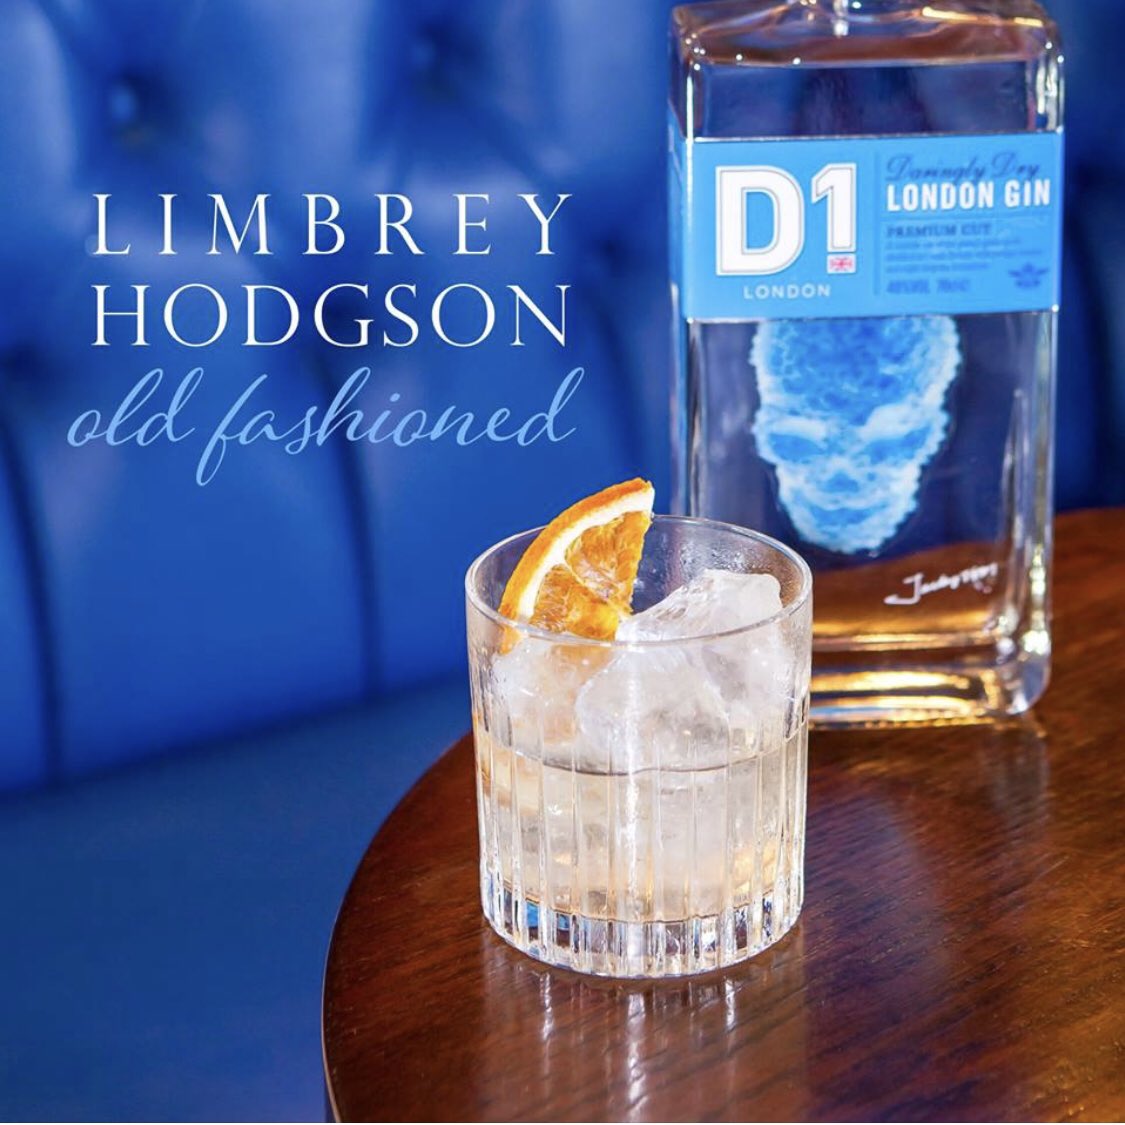 The Limbrey Hodgson Old Fashioned will very quickly become London's worst kept secret - @merchanthouse_b have created a marvellous winter warmer served in their relaxed City basement bar. Sit back, enjoy and think of England as they take part in our #D1CocktailExchange